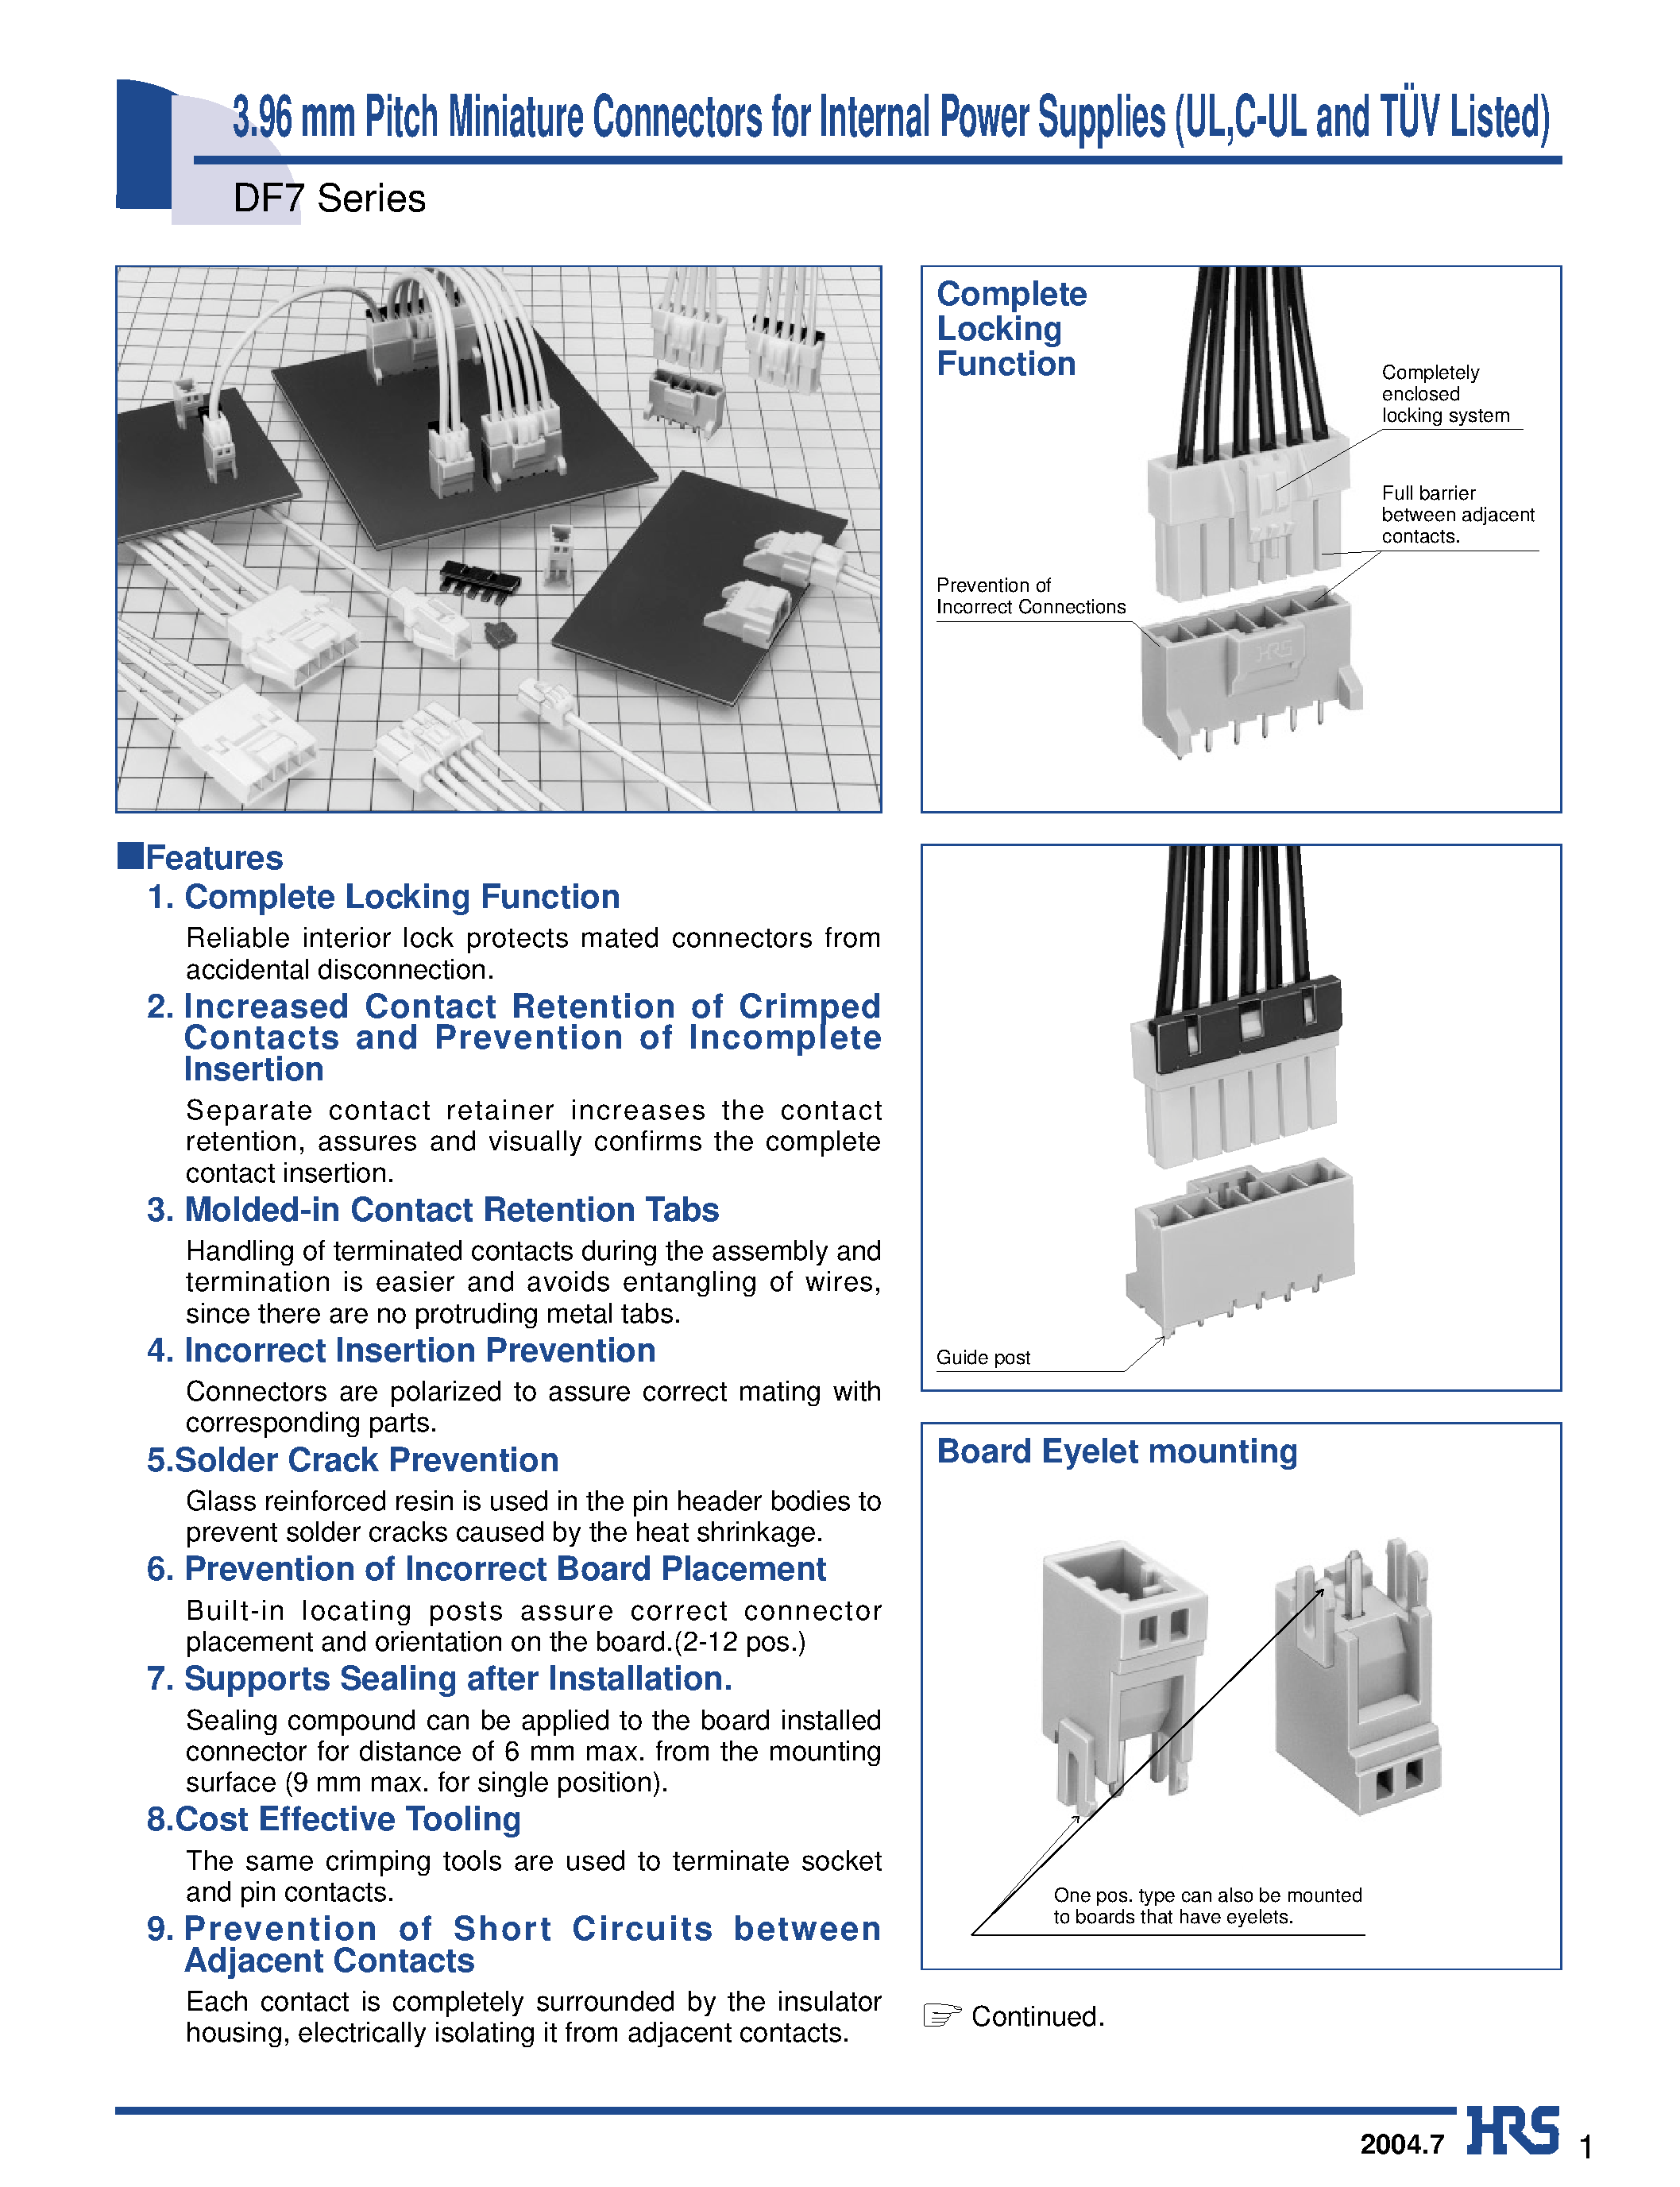 Datasheet DF7-3RS/P-3.96DS - 3.96 mm Pitch Miniature Connectors for Internal Power Supplies (UL /C-UL and TUV Listed) page 1